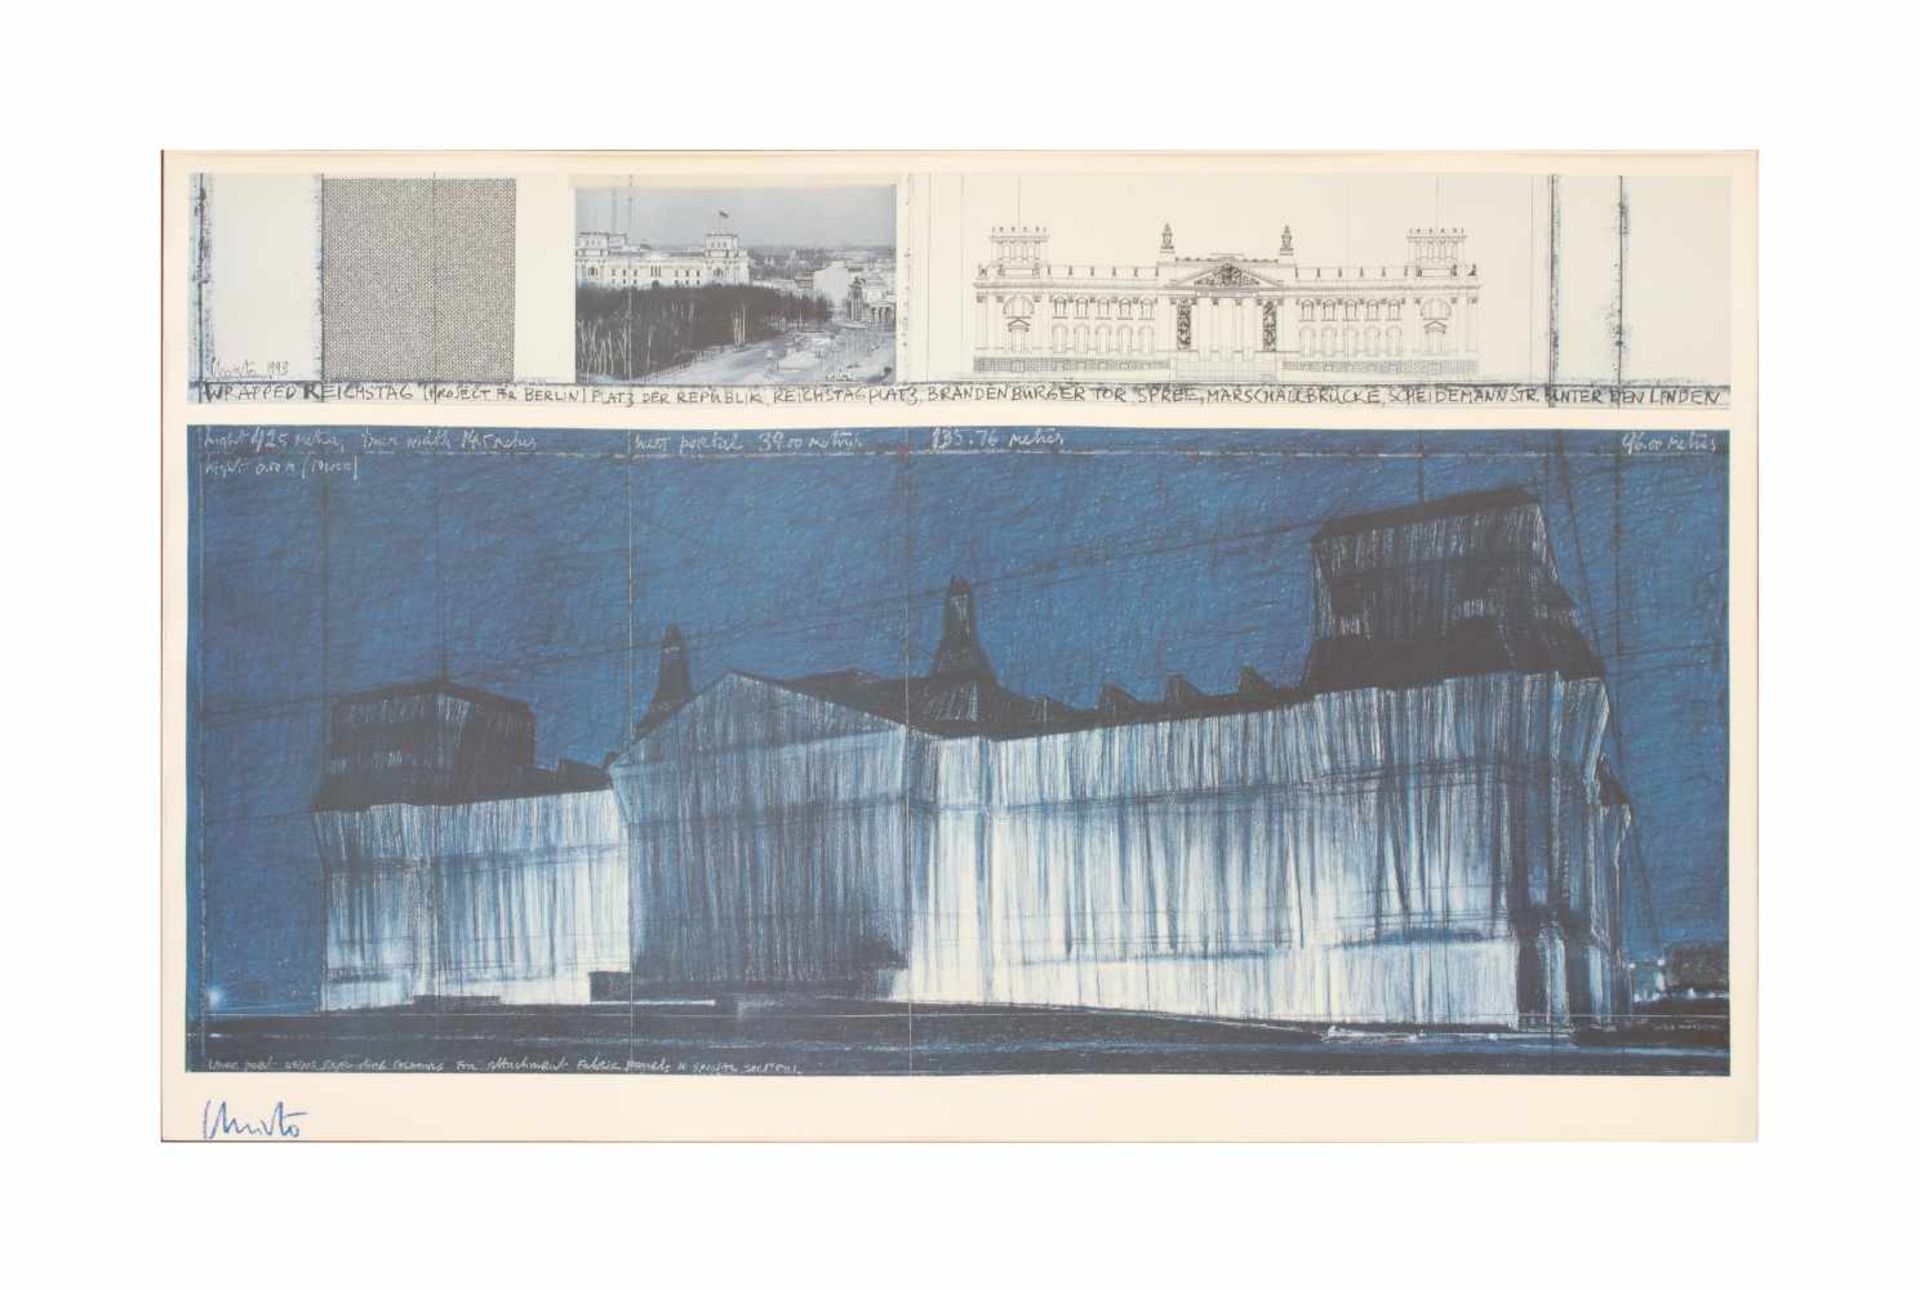 Christo (1935 Gabrowo) Wrapped Reichstag, Project for Berlin Nr. VII, Vierfarbenoffset im Nass-in-